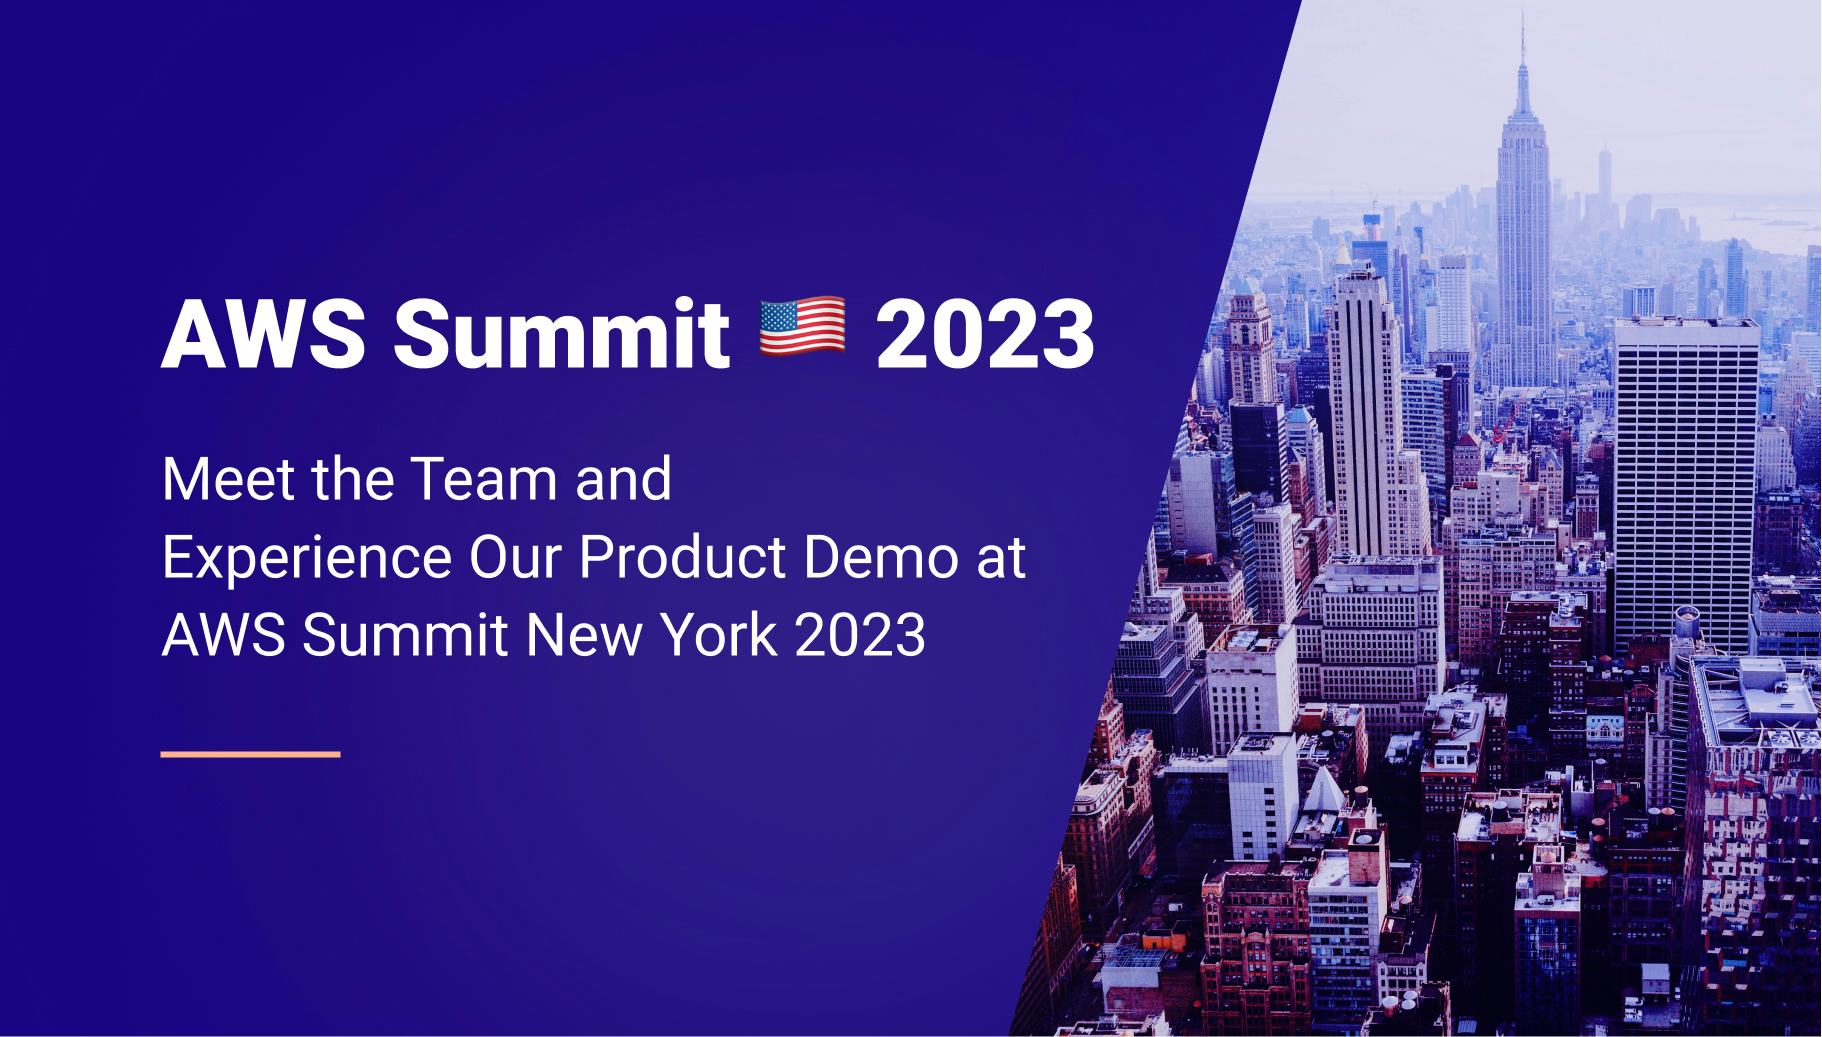 Join Qovery at AWS Summit New York 2023 Meet the Team and Experience